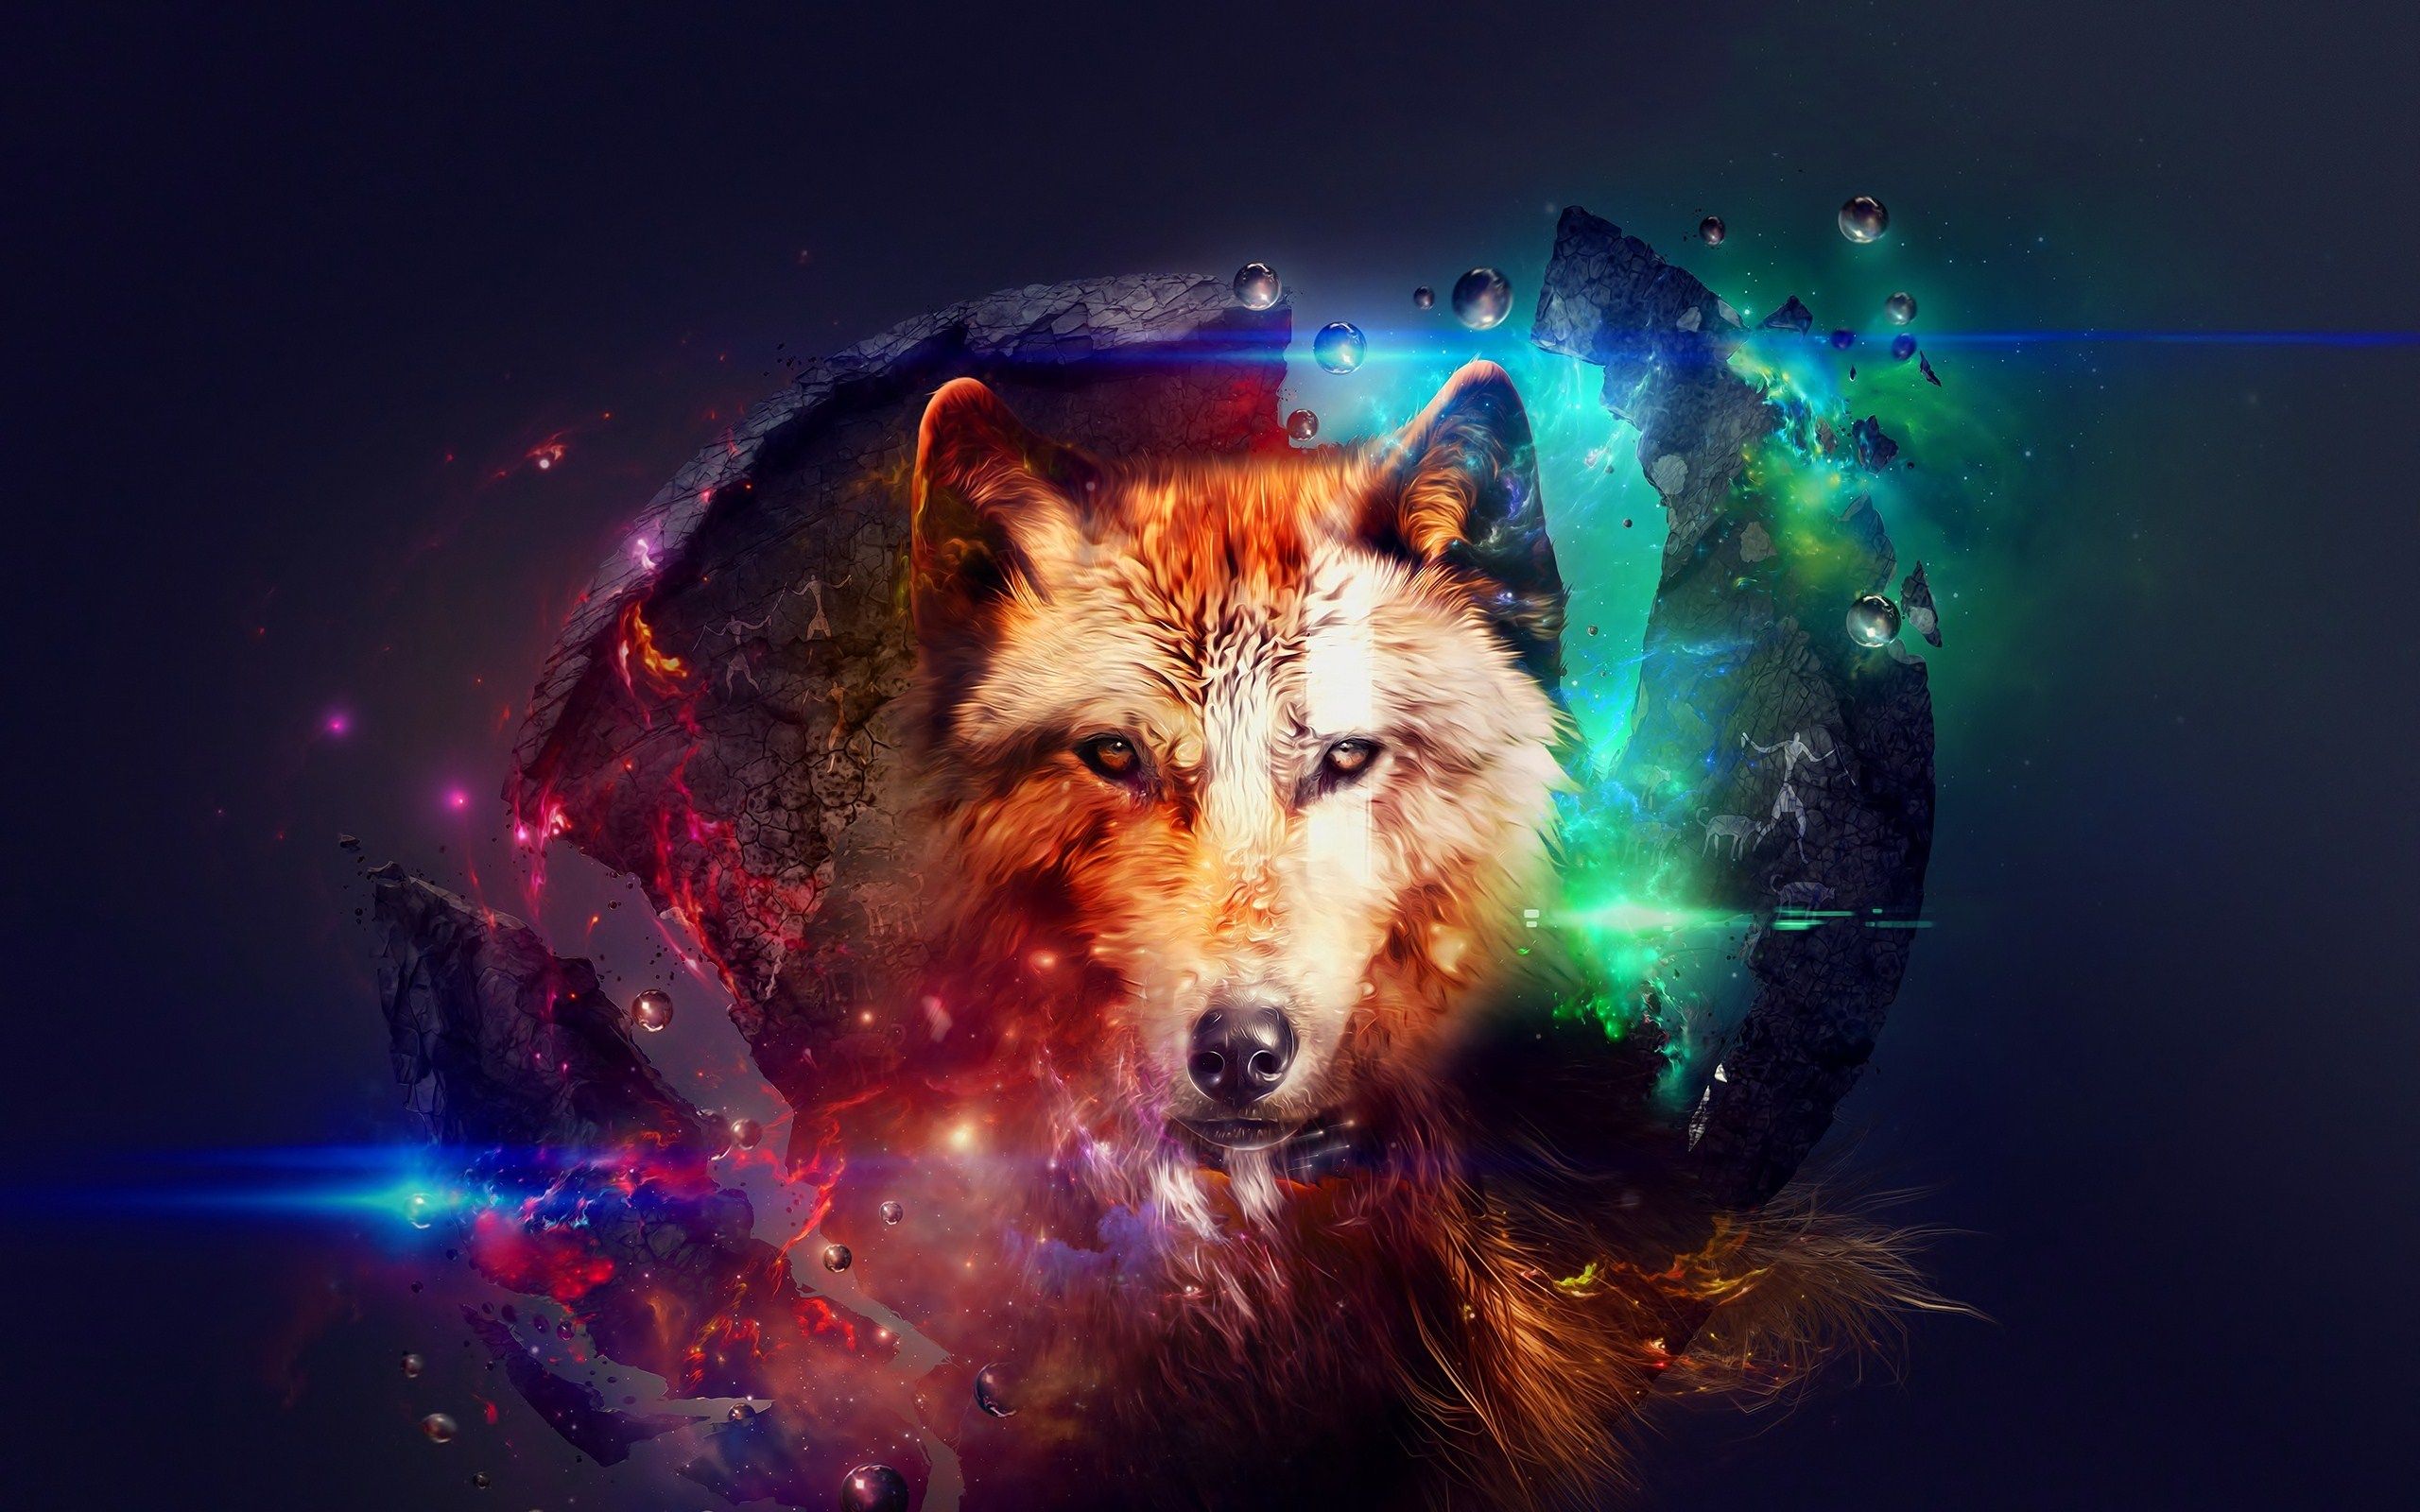 Abstract wolf Computer Wallpapers, Desktop Backgrounds 2560x1600